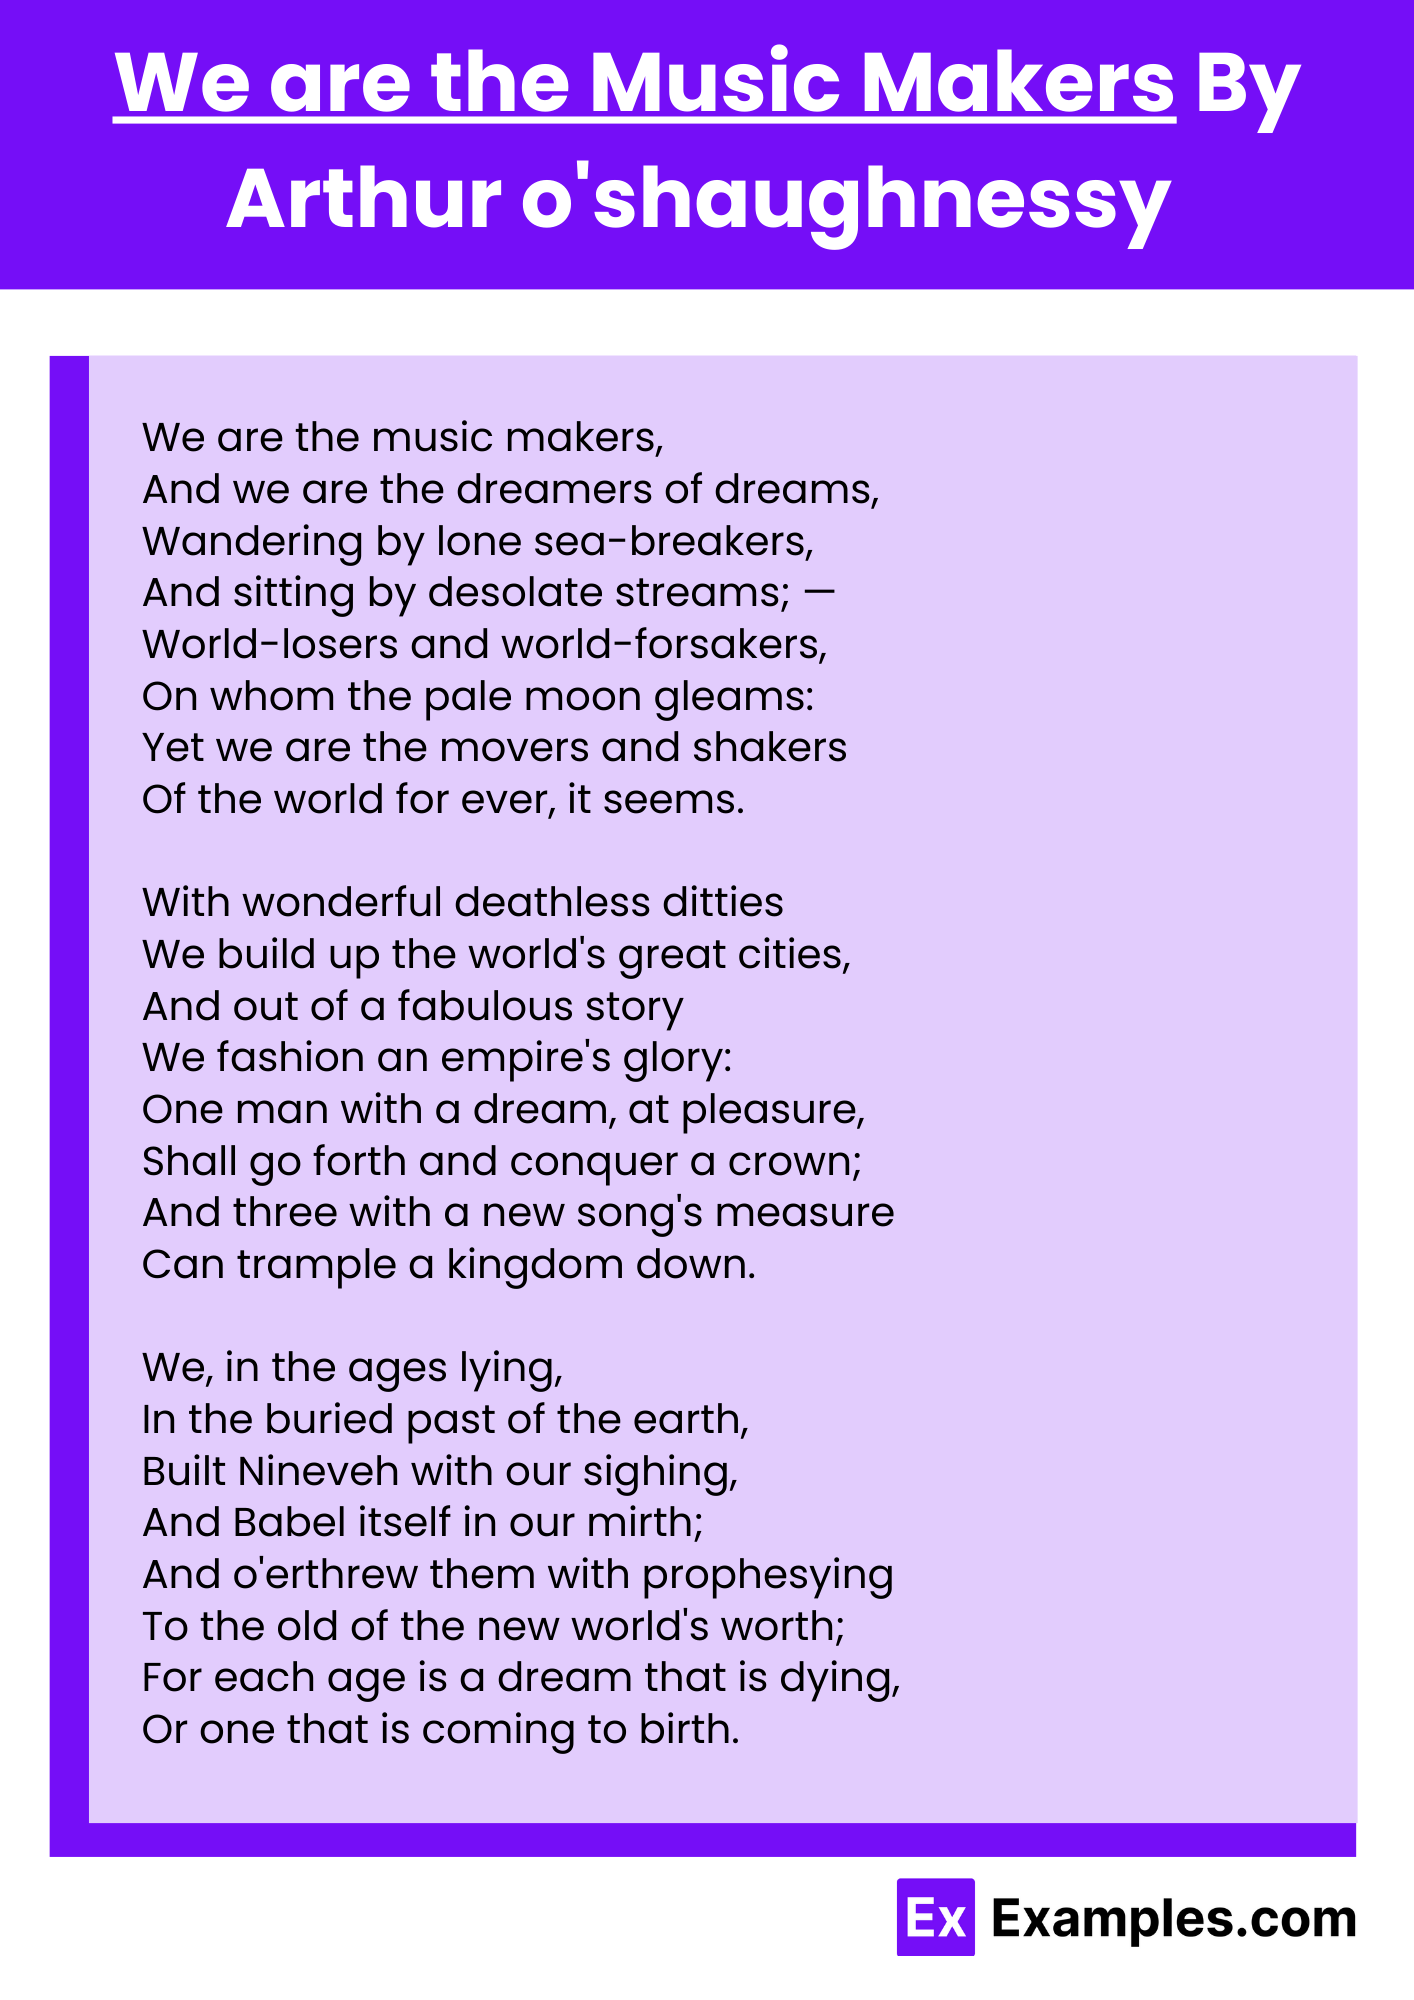 We are the Music Makers By Arthur o'shaughnessy